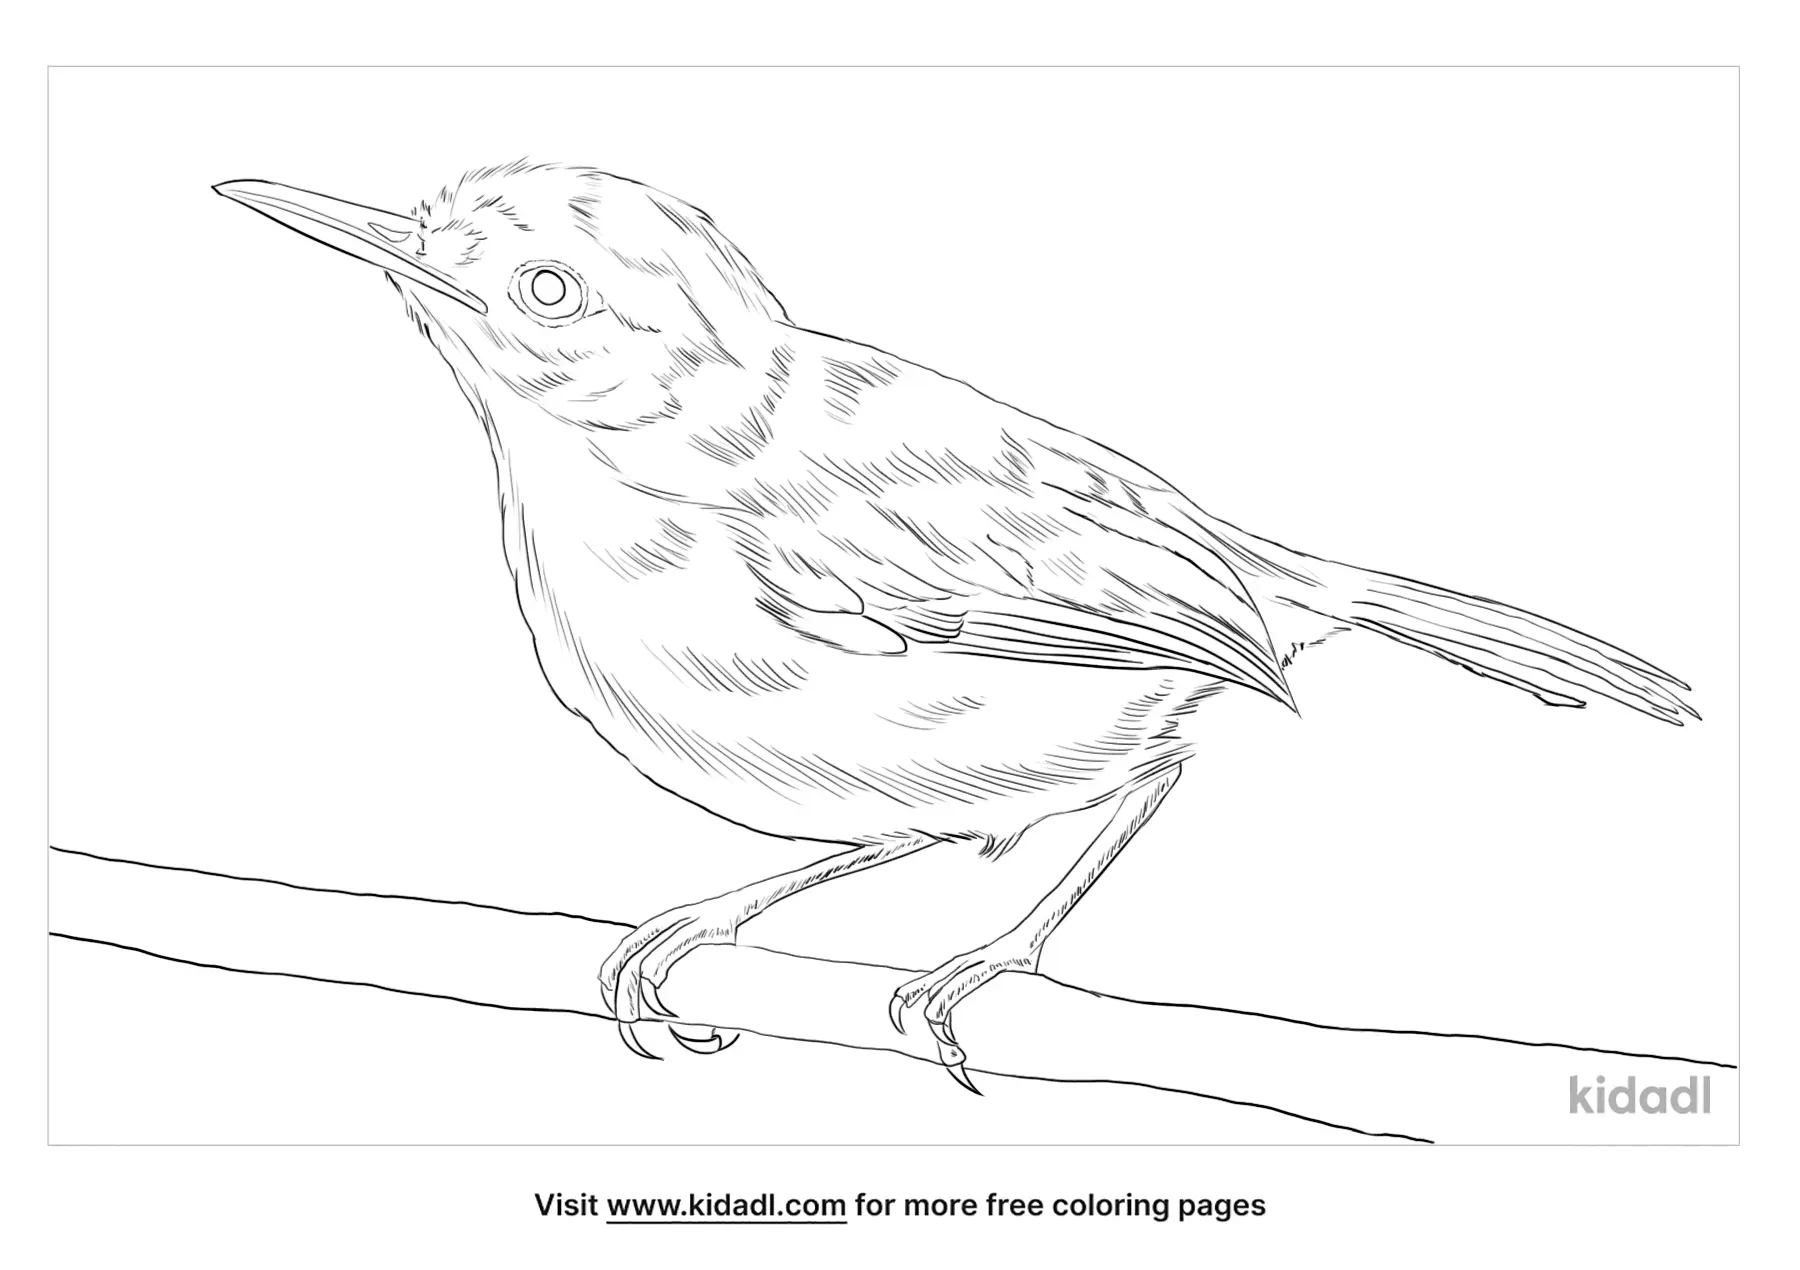 Olive Sparrow Coloring Page | Free Birds Coloring Page | Kidadl